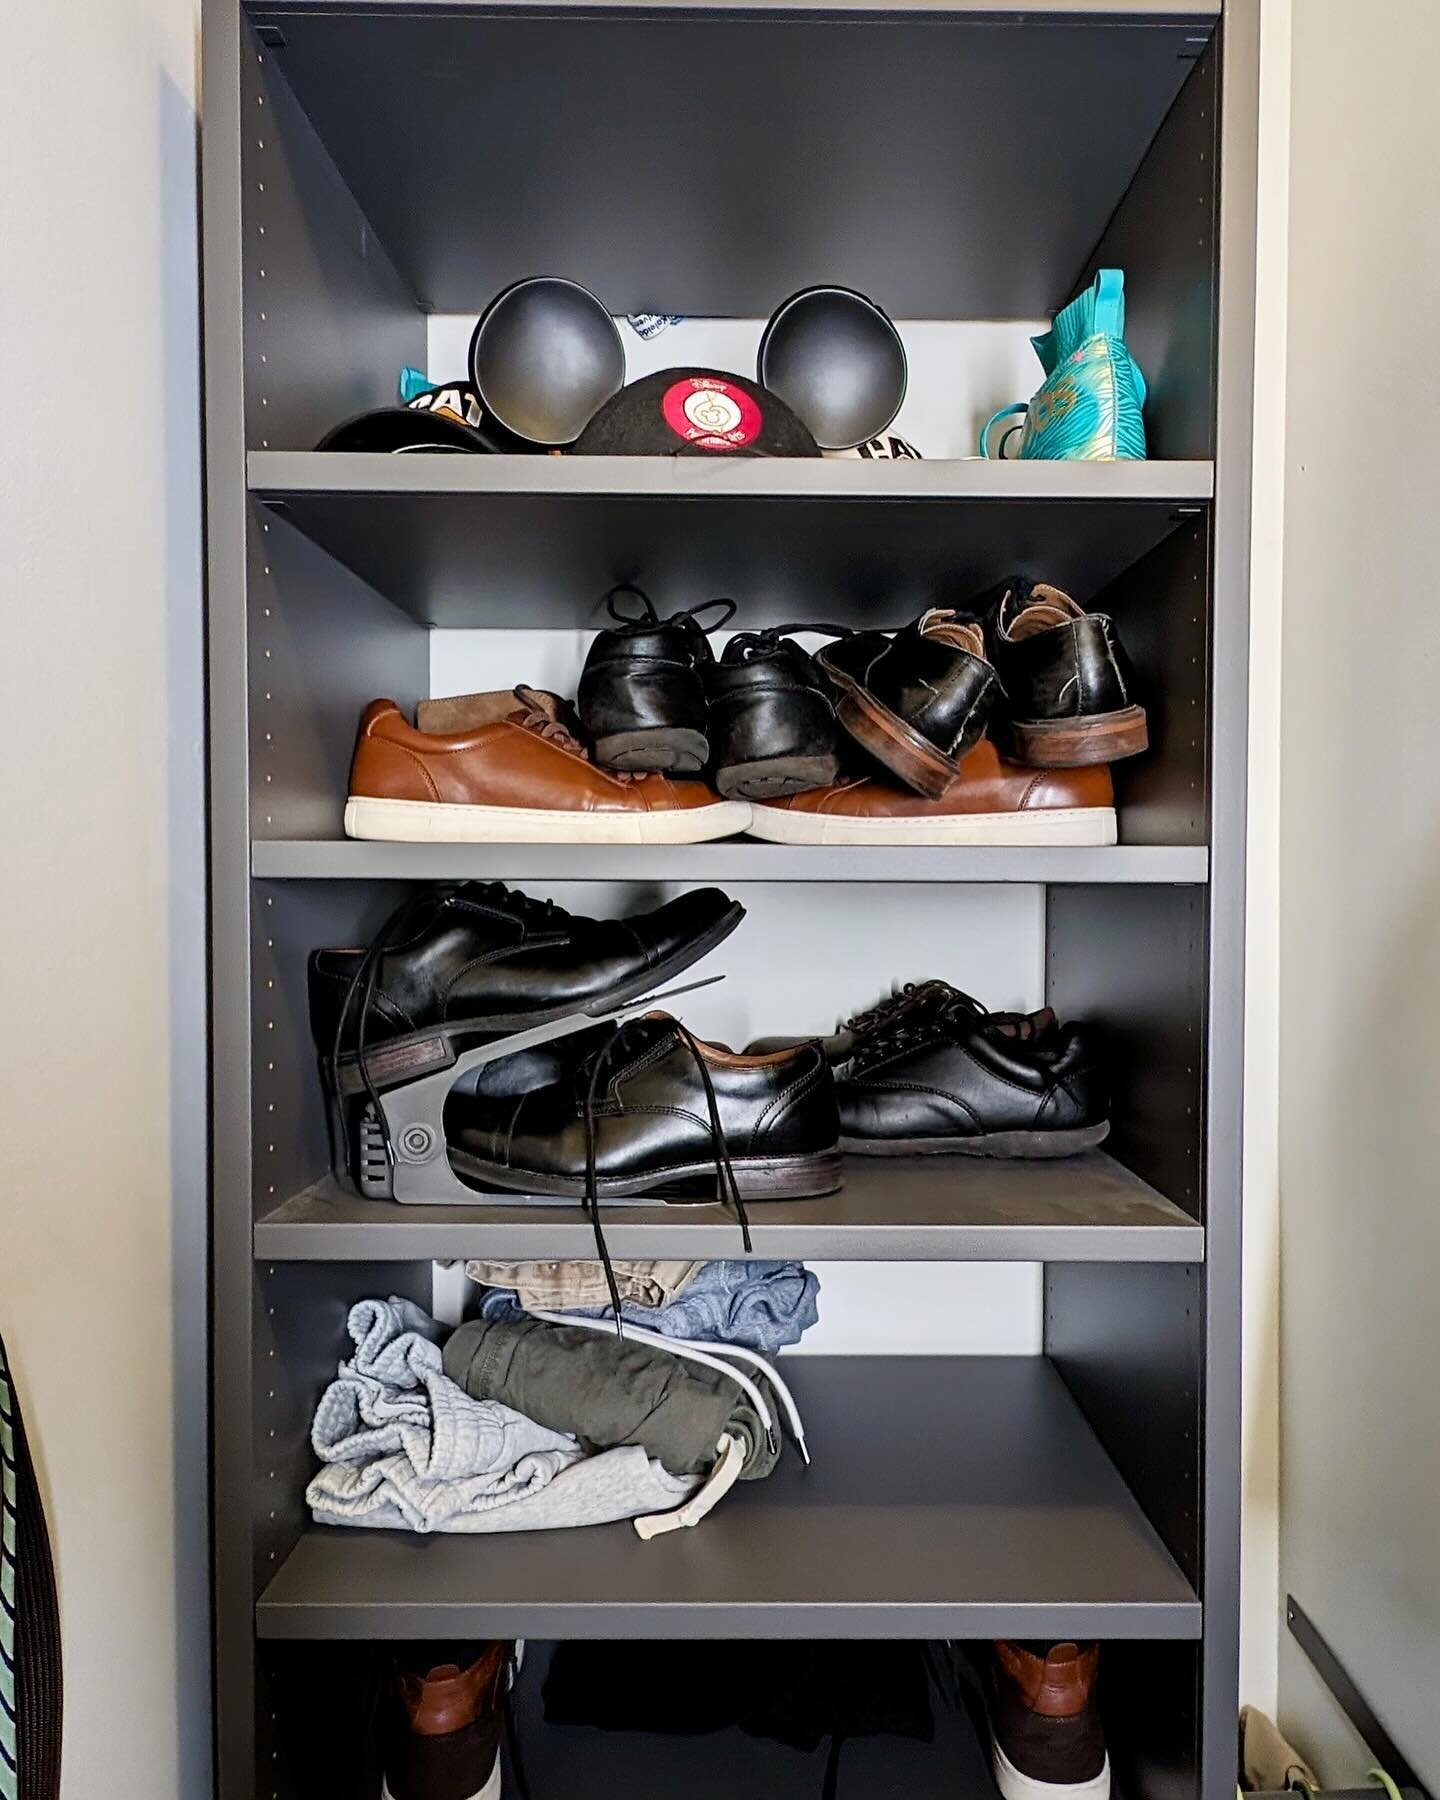 💫 Chaos Resilience! 

🥁 I will beat this drum forever &hellip; chaos *will* happen. But we can recover quickly when there&rsquo;s a place for everything. 🥁

👞I added some shoe organizers to my son Calvin&rsquo;s closet to make room &mdash; he&rsq